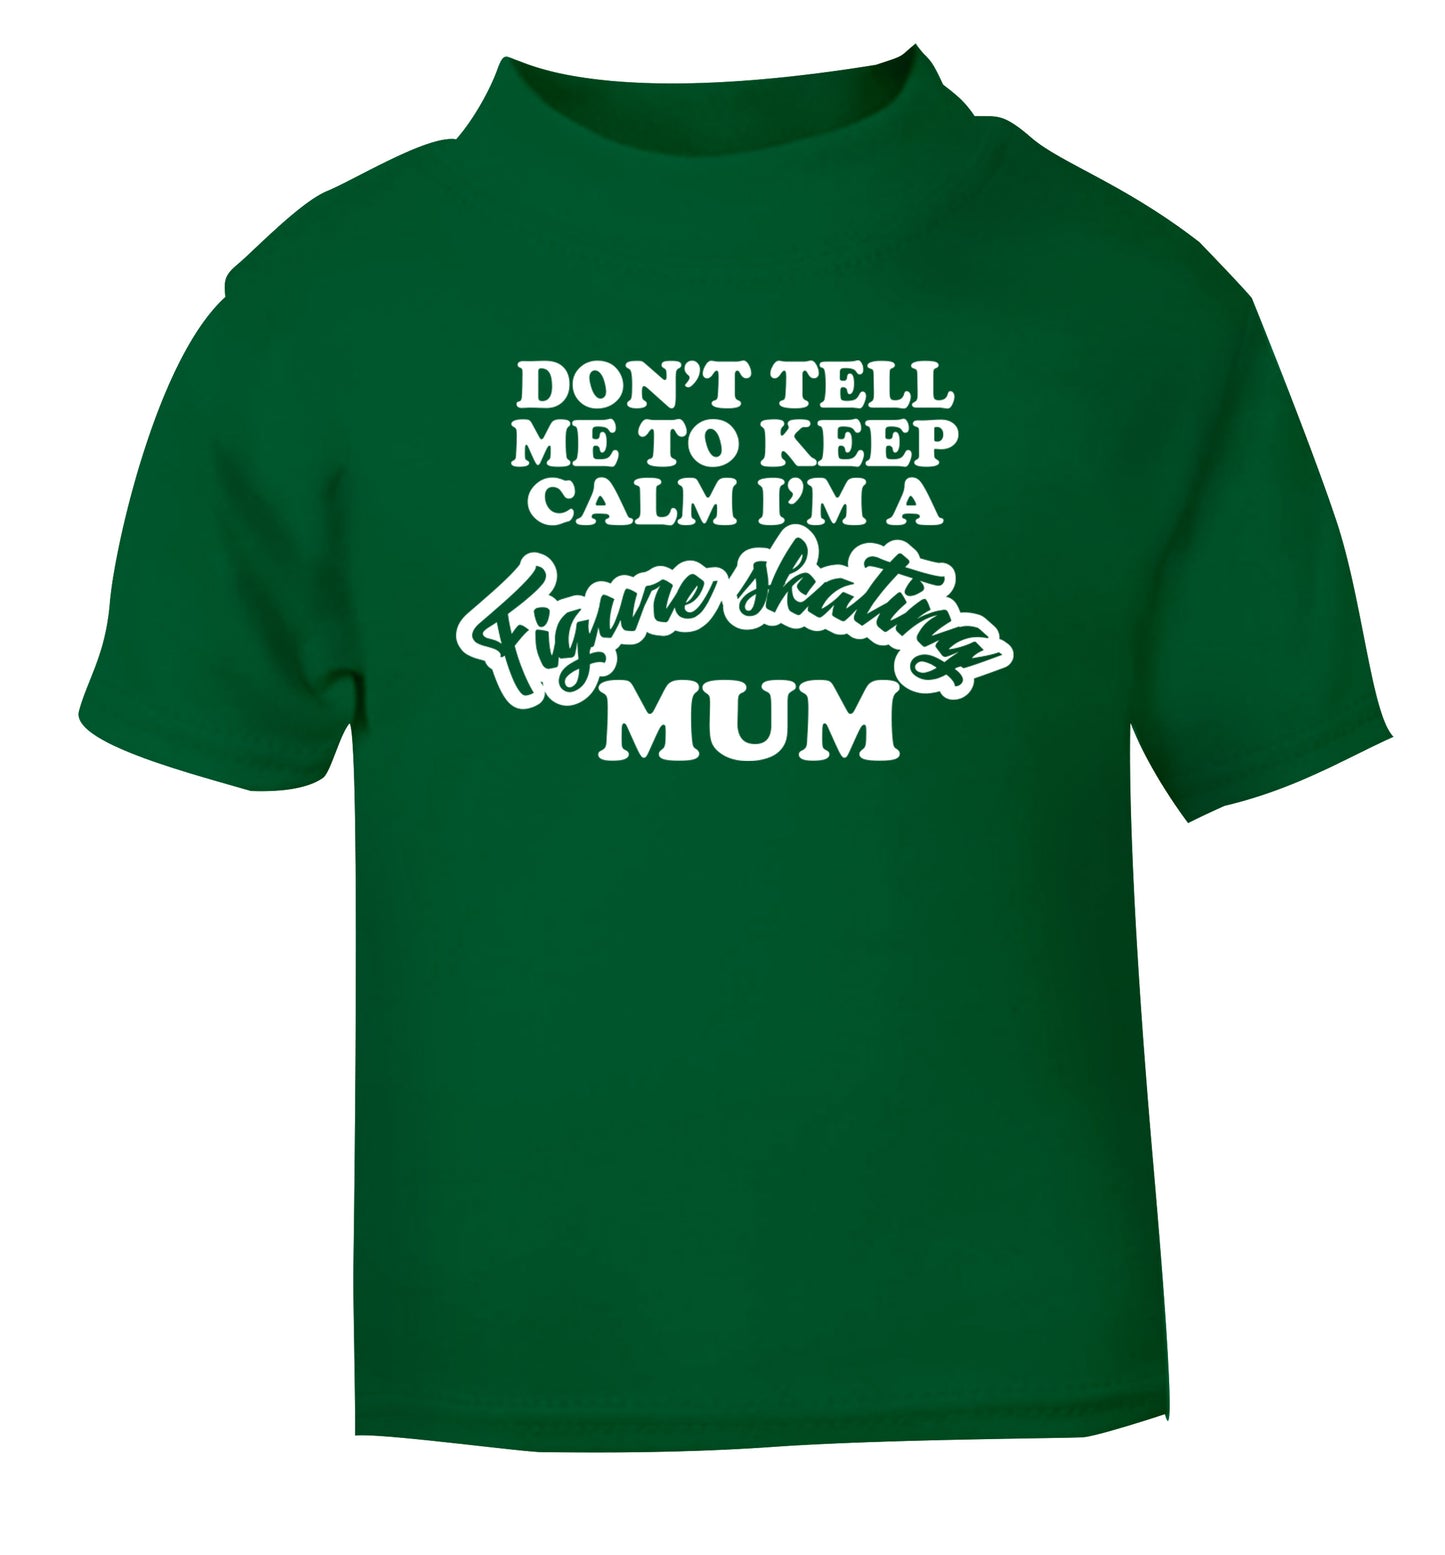 Don't tell me to keep calm I'm a figure skating mum green Baby Toddler Tshirt 2 Years